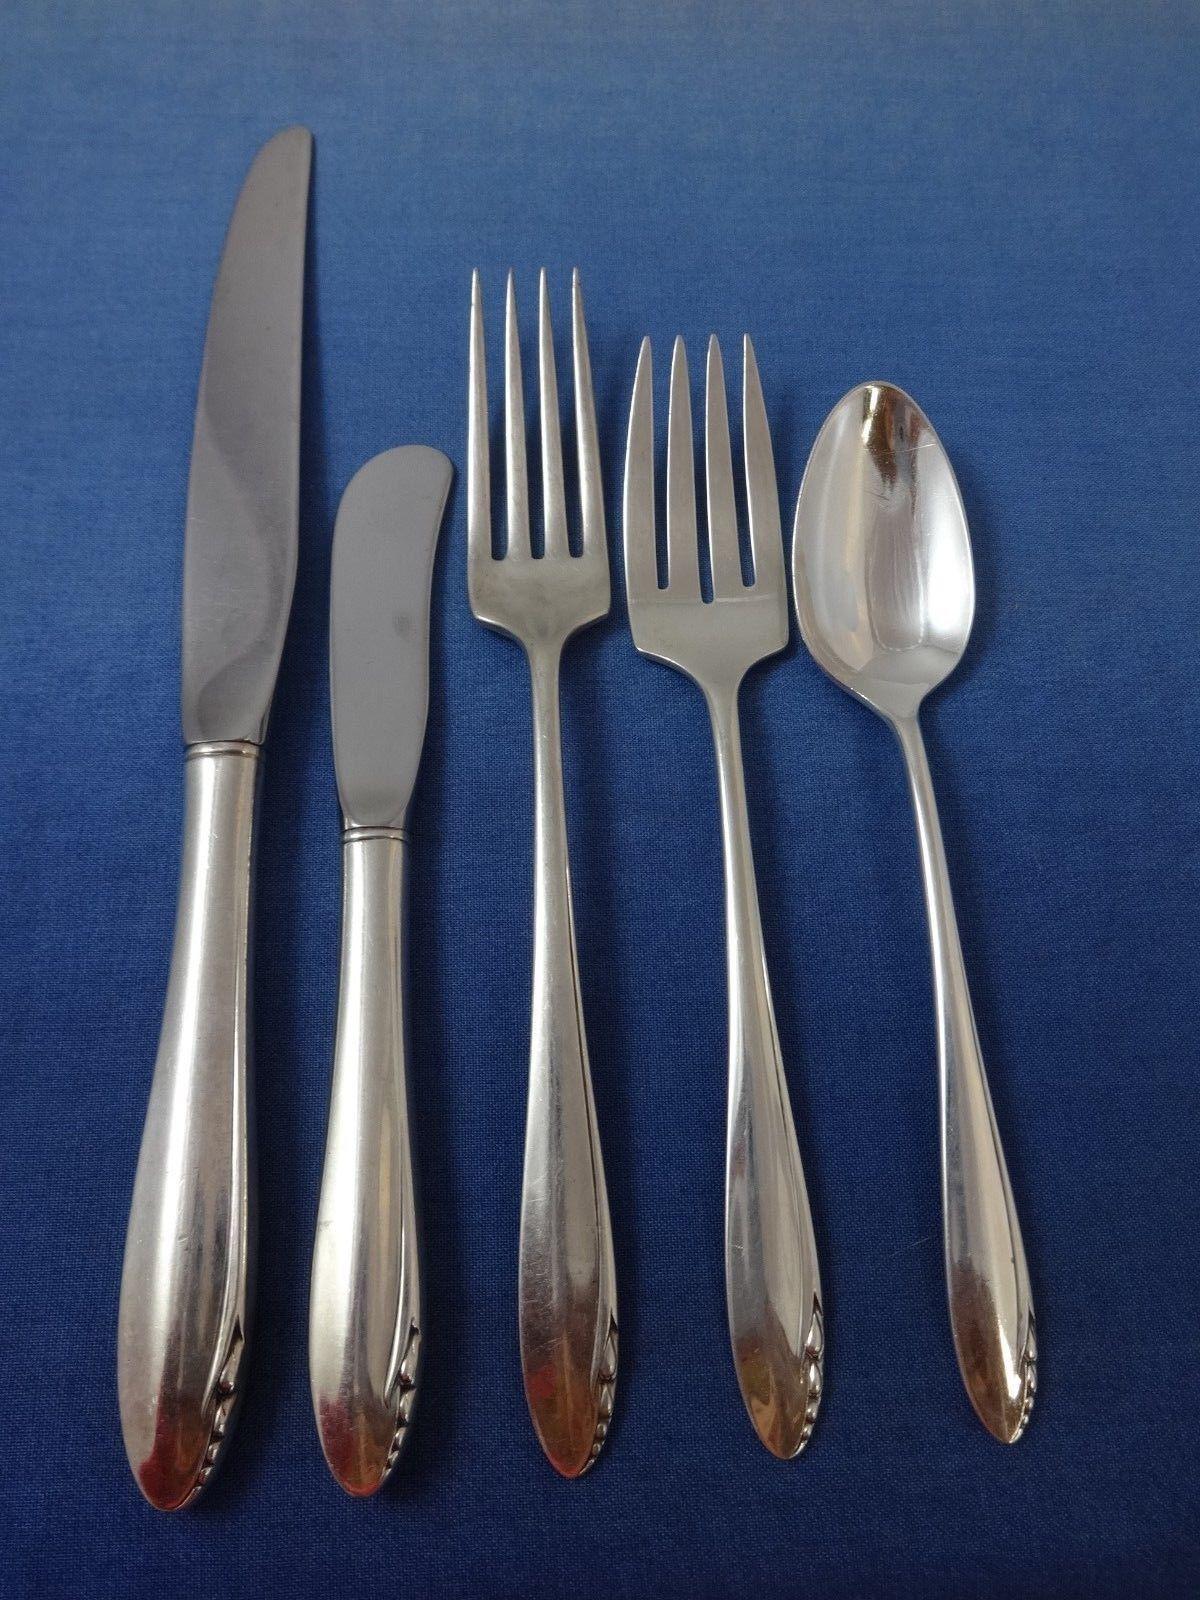 Lasting Spring by Oneida sterling silver flatware set, 44 Pieces. This set includes:

8 knives, 8 7/8